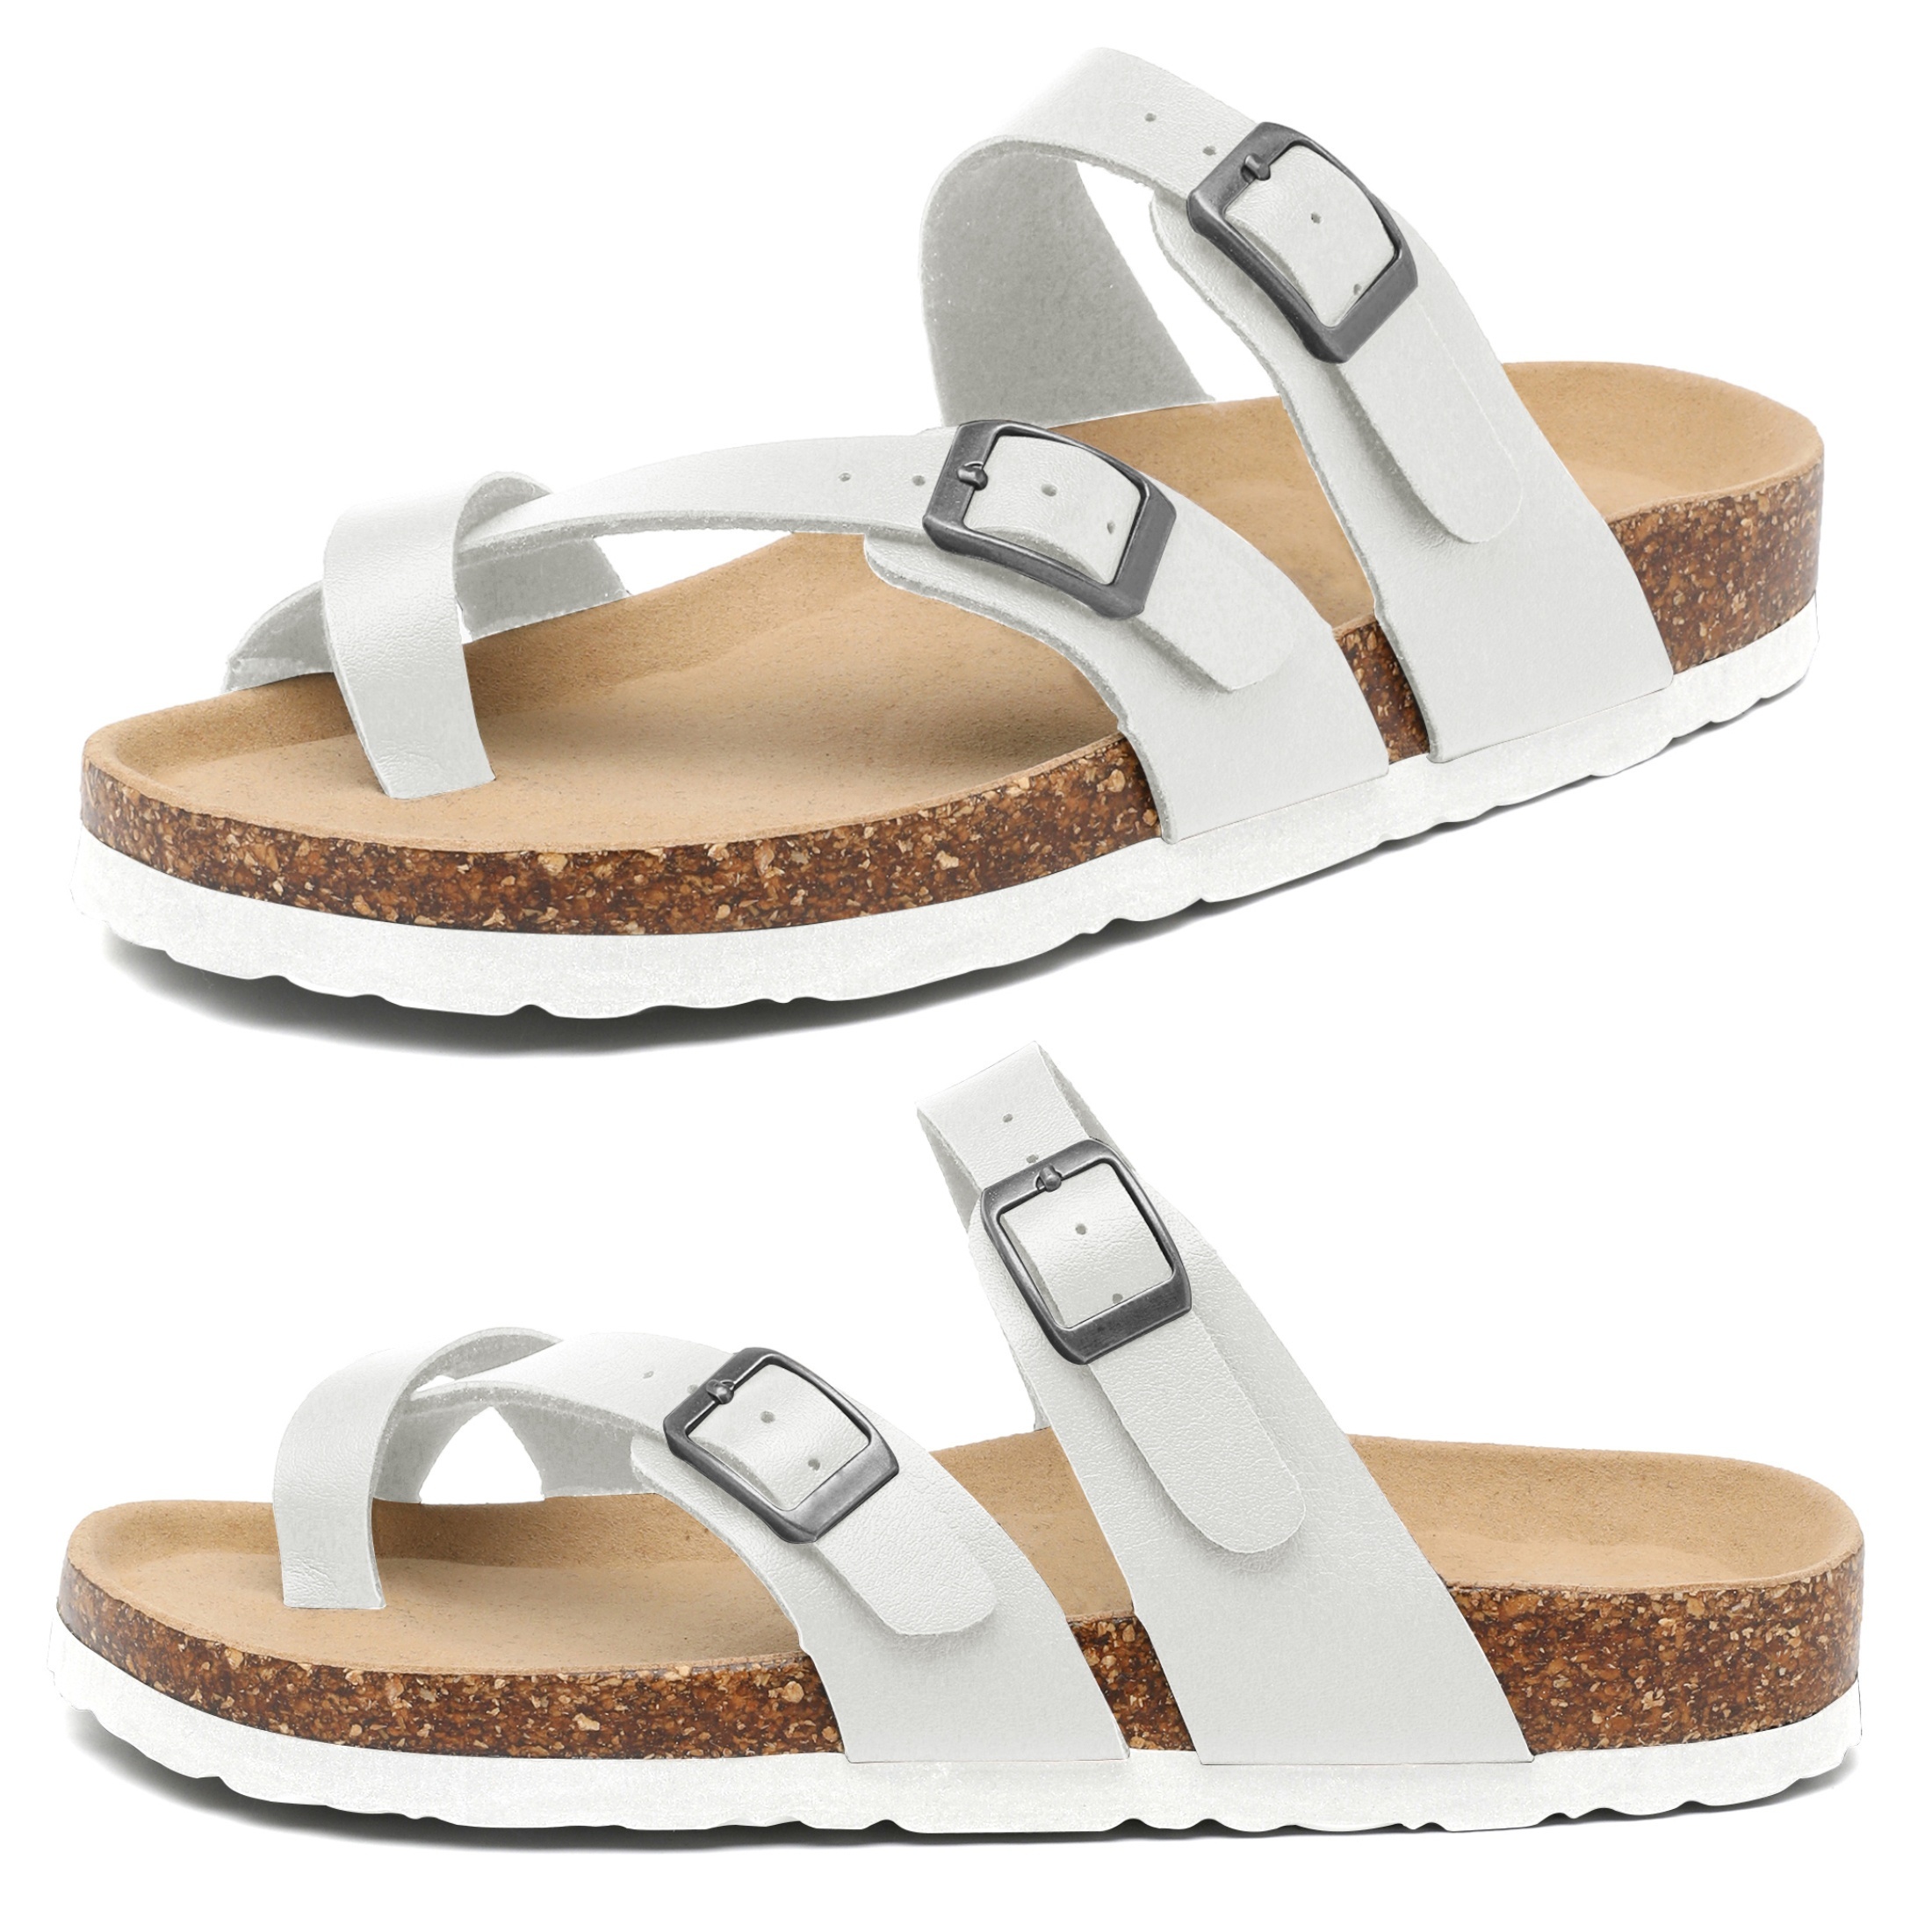 

Women's Casual Leather Sandals | Adjustable Buckle Strappy Slip-on Slides | Comfortable Cork Footbed With Arch Support For Outdoor Use